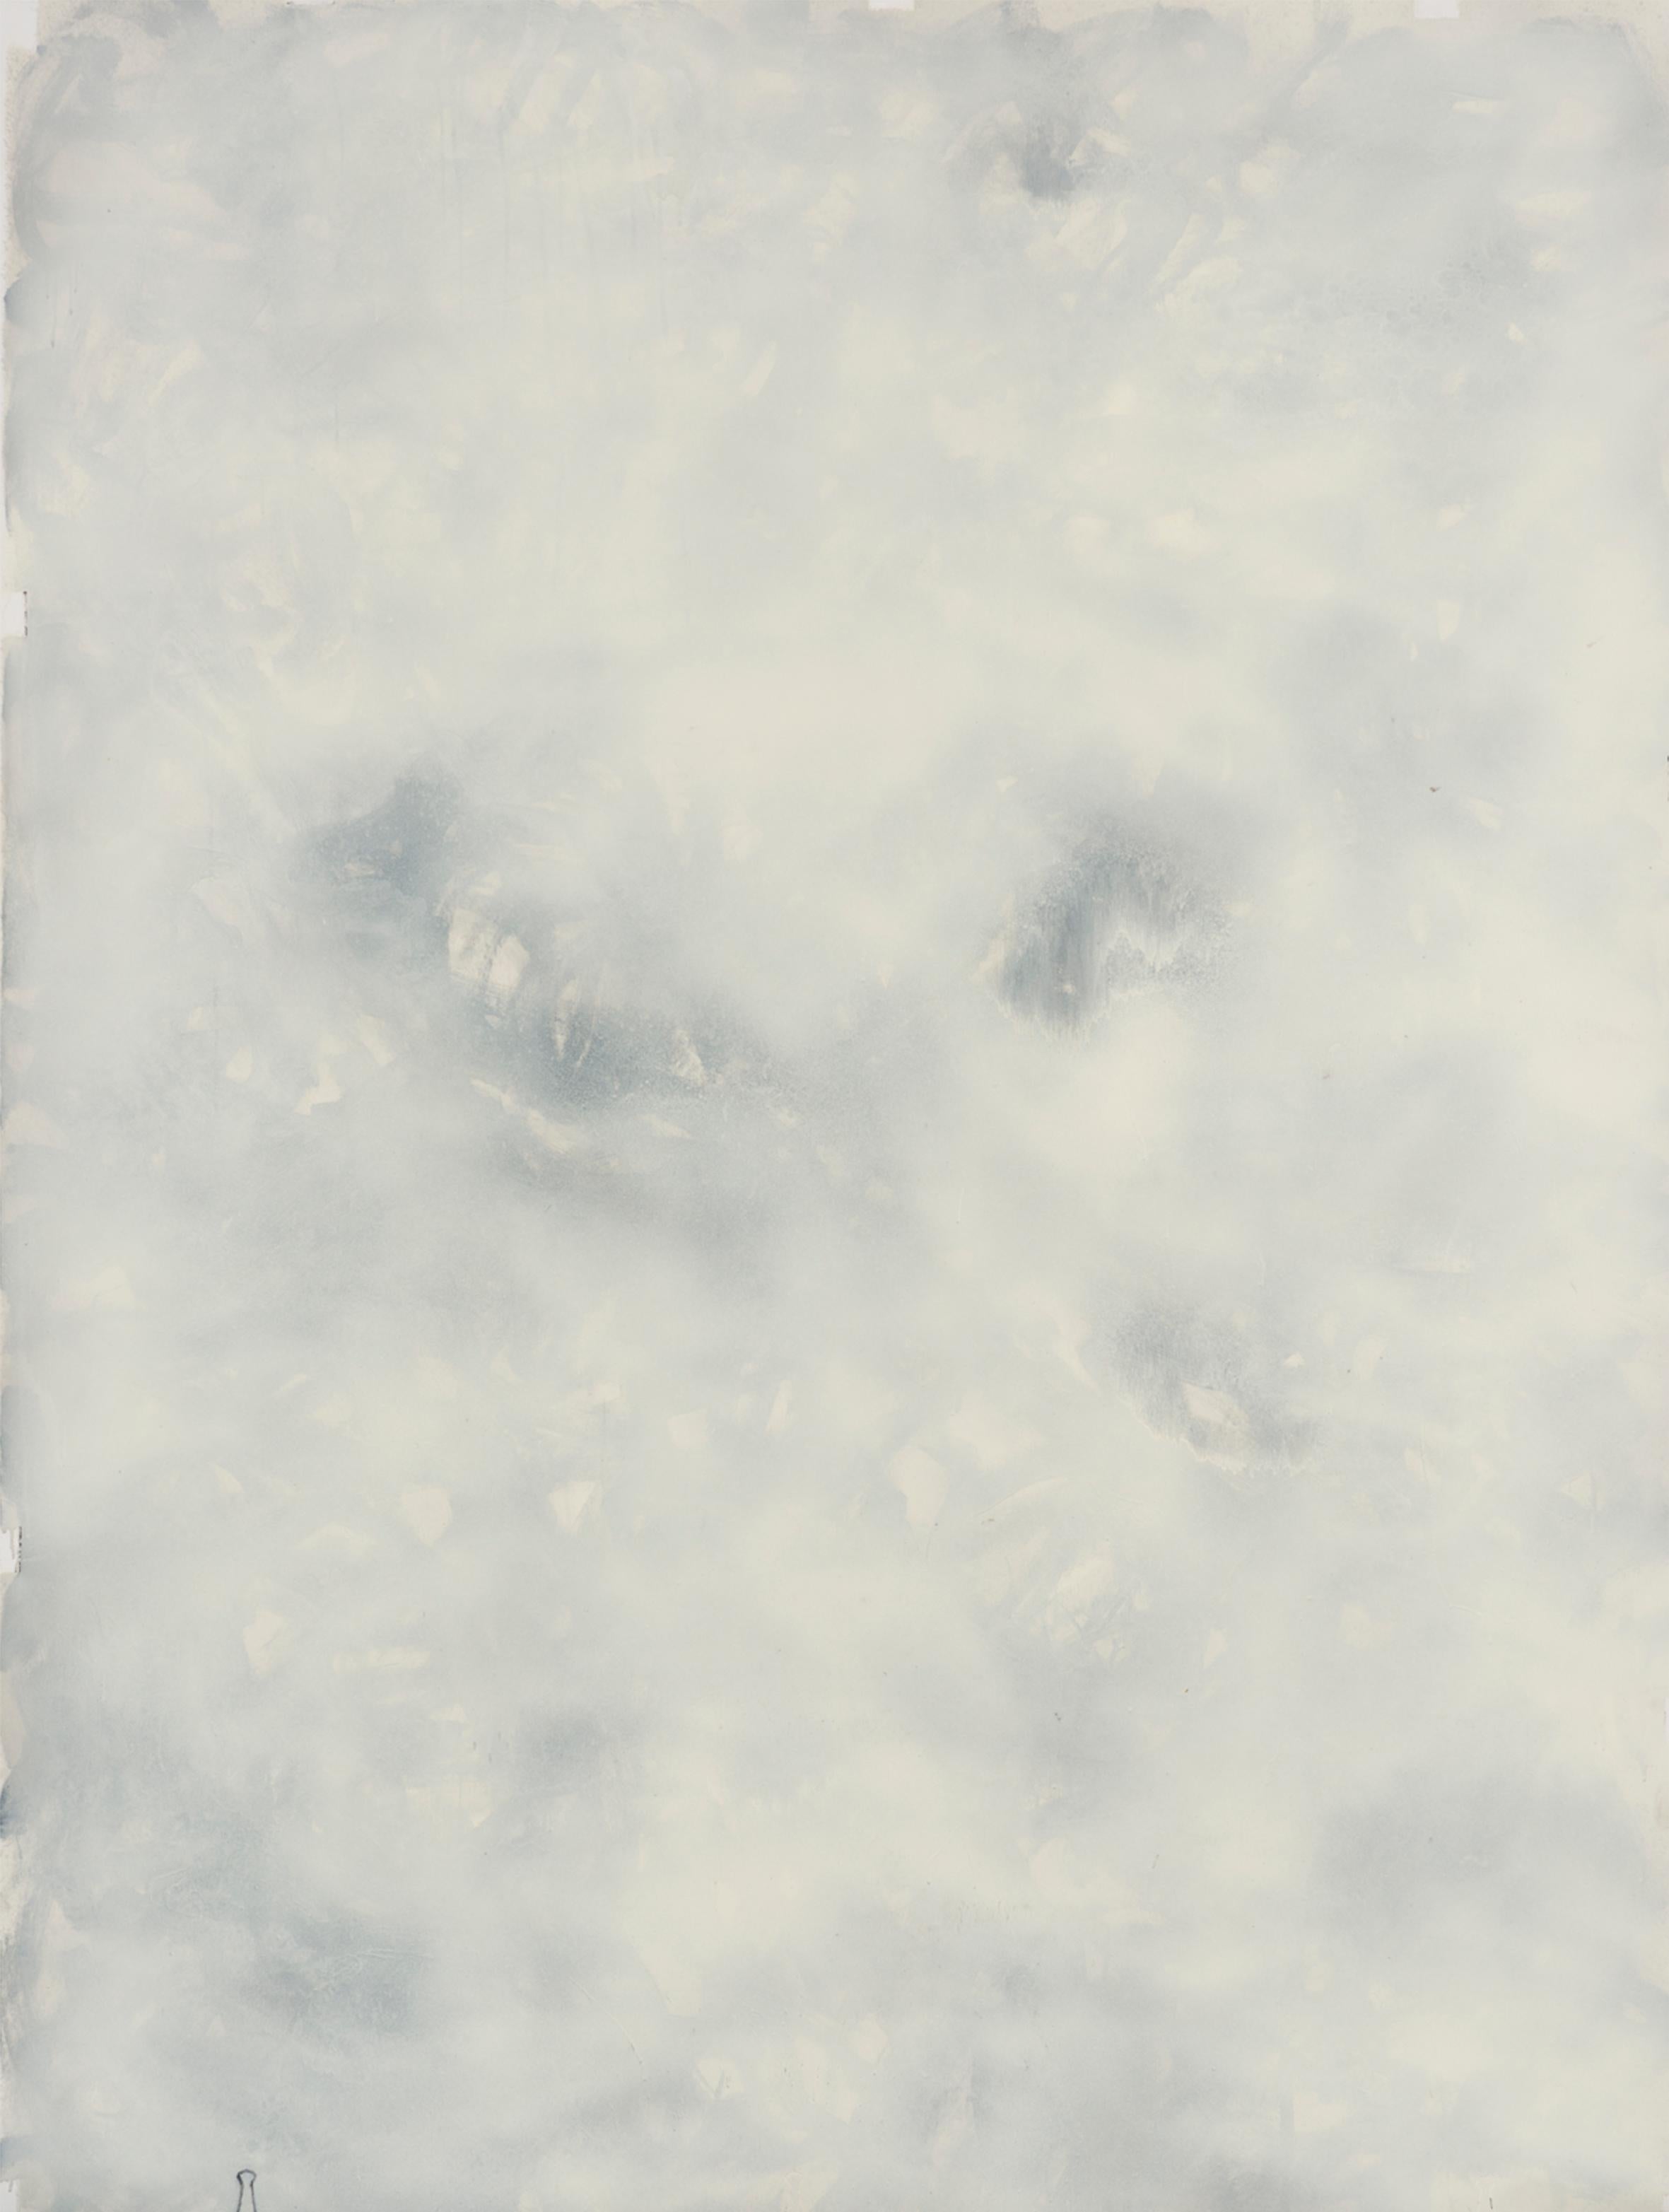 Untitled 015 [Remains of the Remains 015], 2019
oil on canvas
78 47/64 H x 59 1/16 W in
200 H x 150 W cm

The large-sized paintings, signed by Zsolt Berszán, addresses the subject of death in terms of the remains of decaying bodies. The surface of